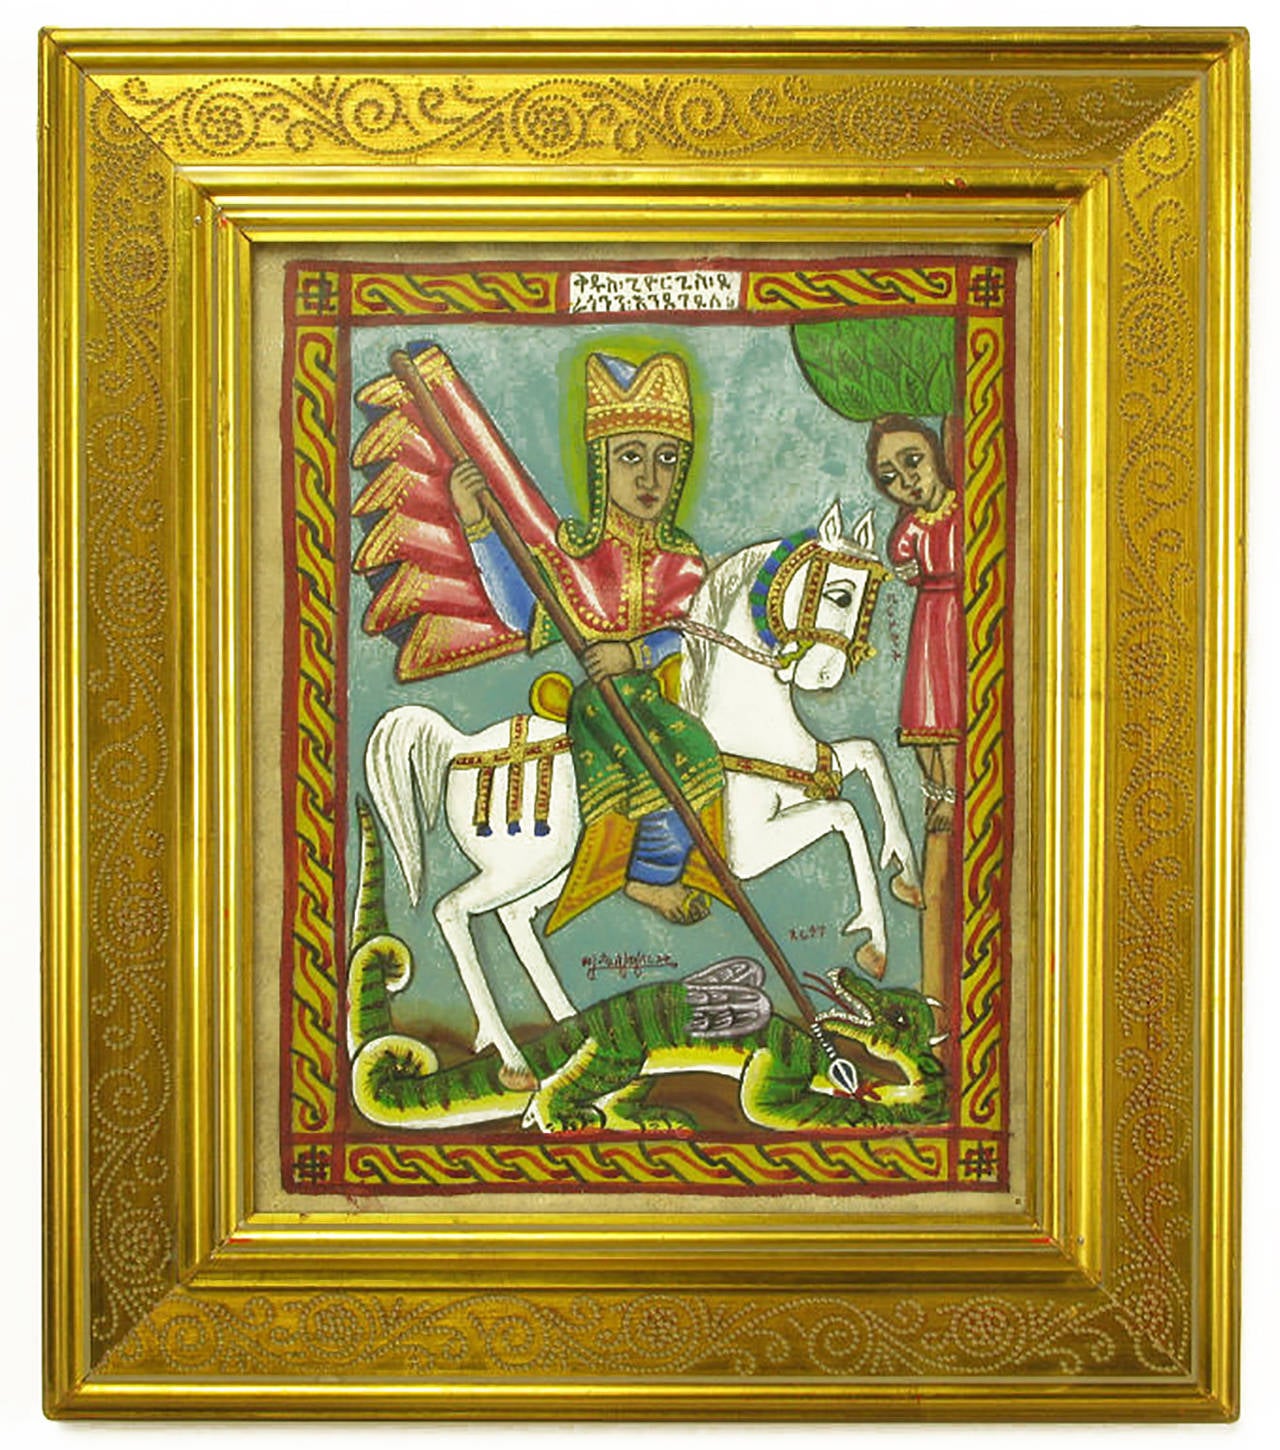 Mixed media gouache, watercolor and gold oil paint on paper depicting Saint George slaying a dragon while on horse back with a damsel tied to a tree by Ethiopian artist Tadesse Wolde Aregay. Aregay, born 1953, and educated at Addis Ababa School of